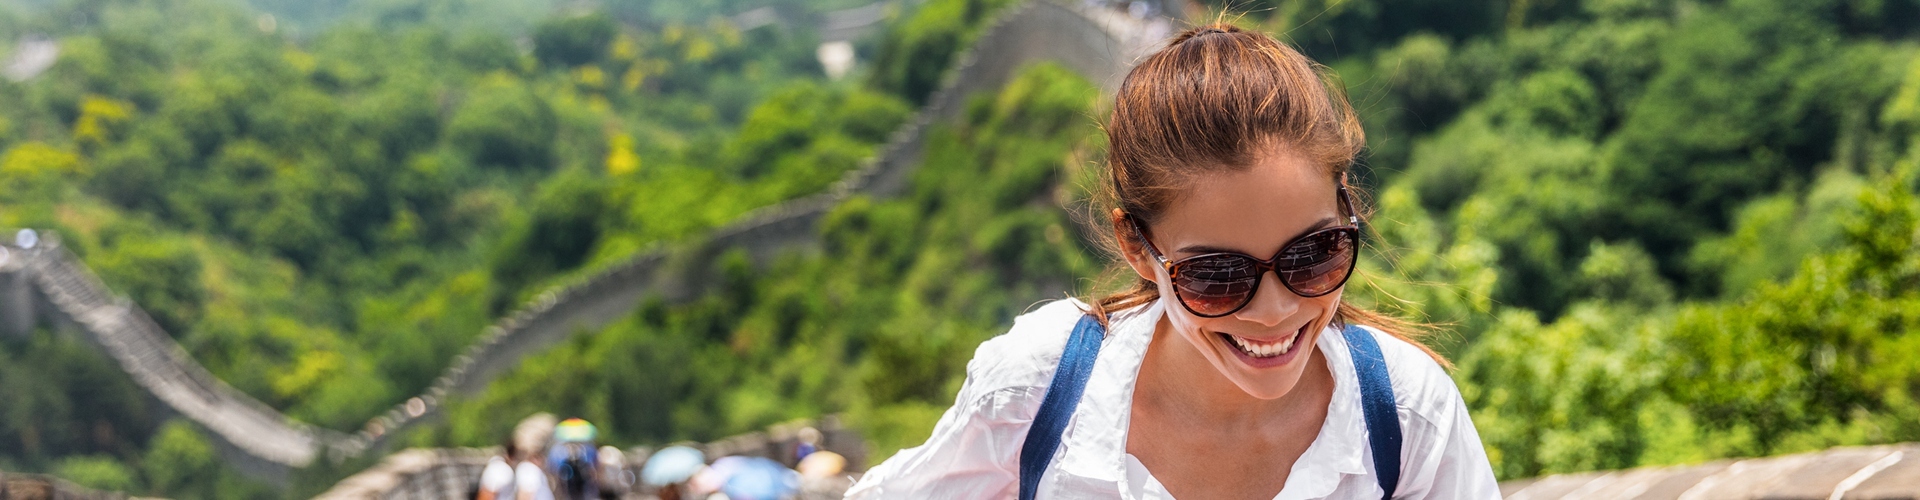 10 Tips for Solo Women Travelers in China